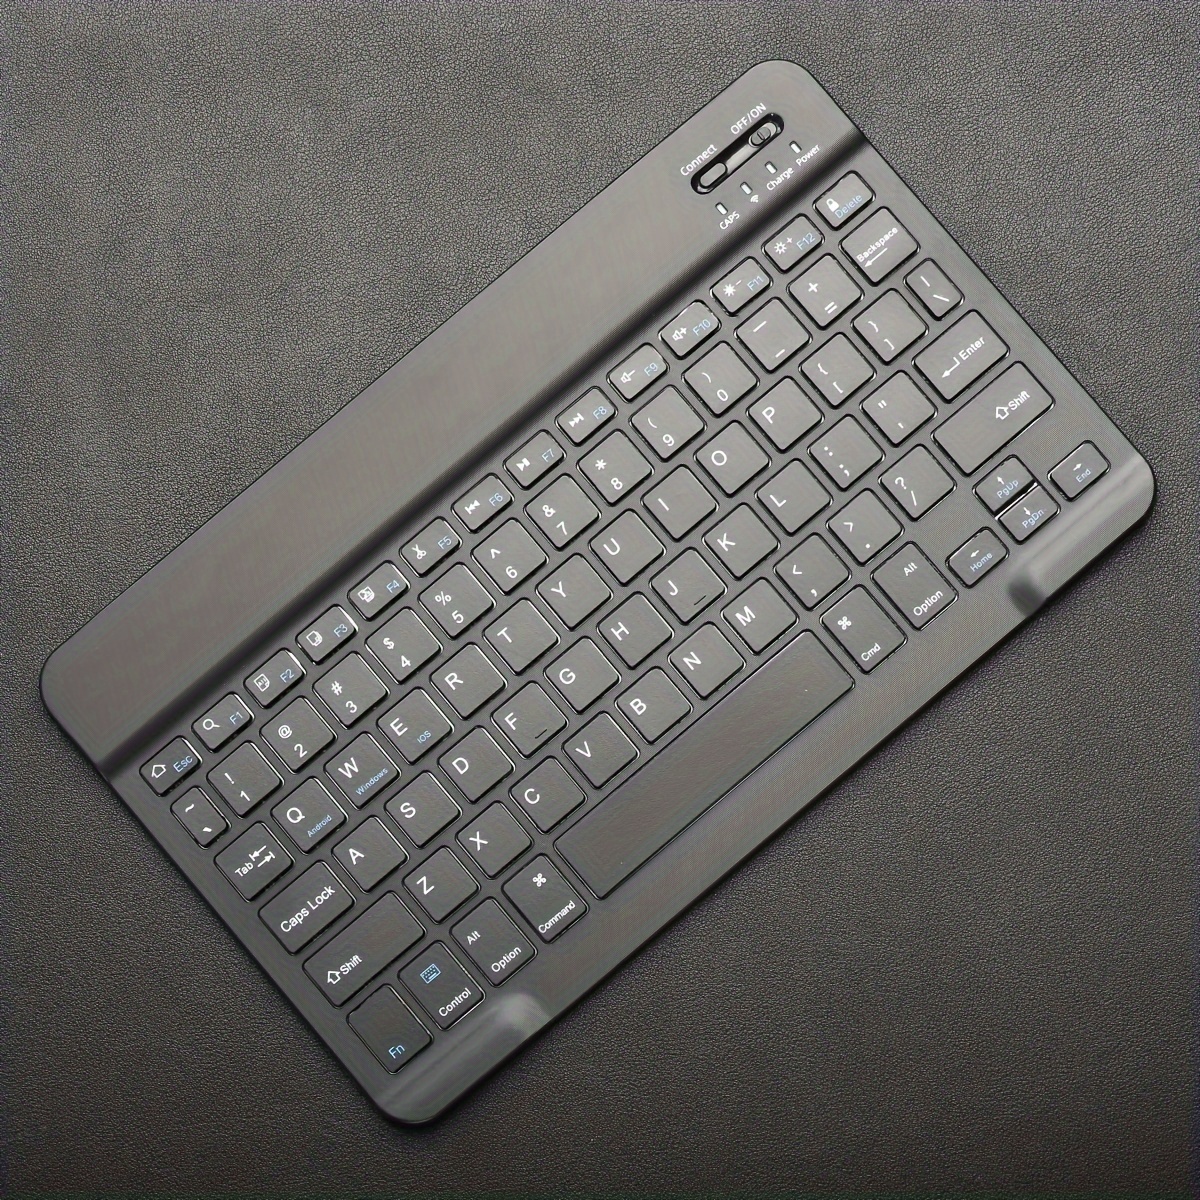 Ultra-Slim Bluetooth Keyboard Portable Mini Wireless Keyboard Rechargeable  for Apple iPad iPhone Samsung Tablet Phone Smartphone iOS Android Windows